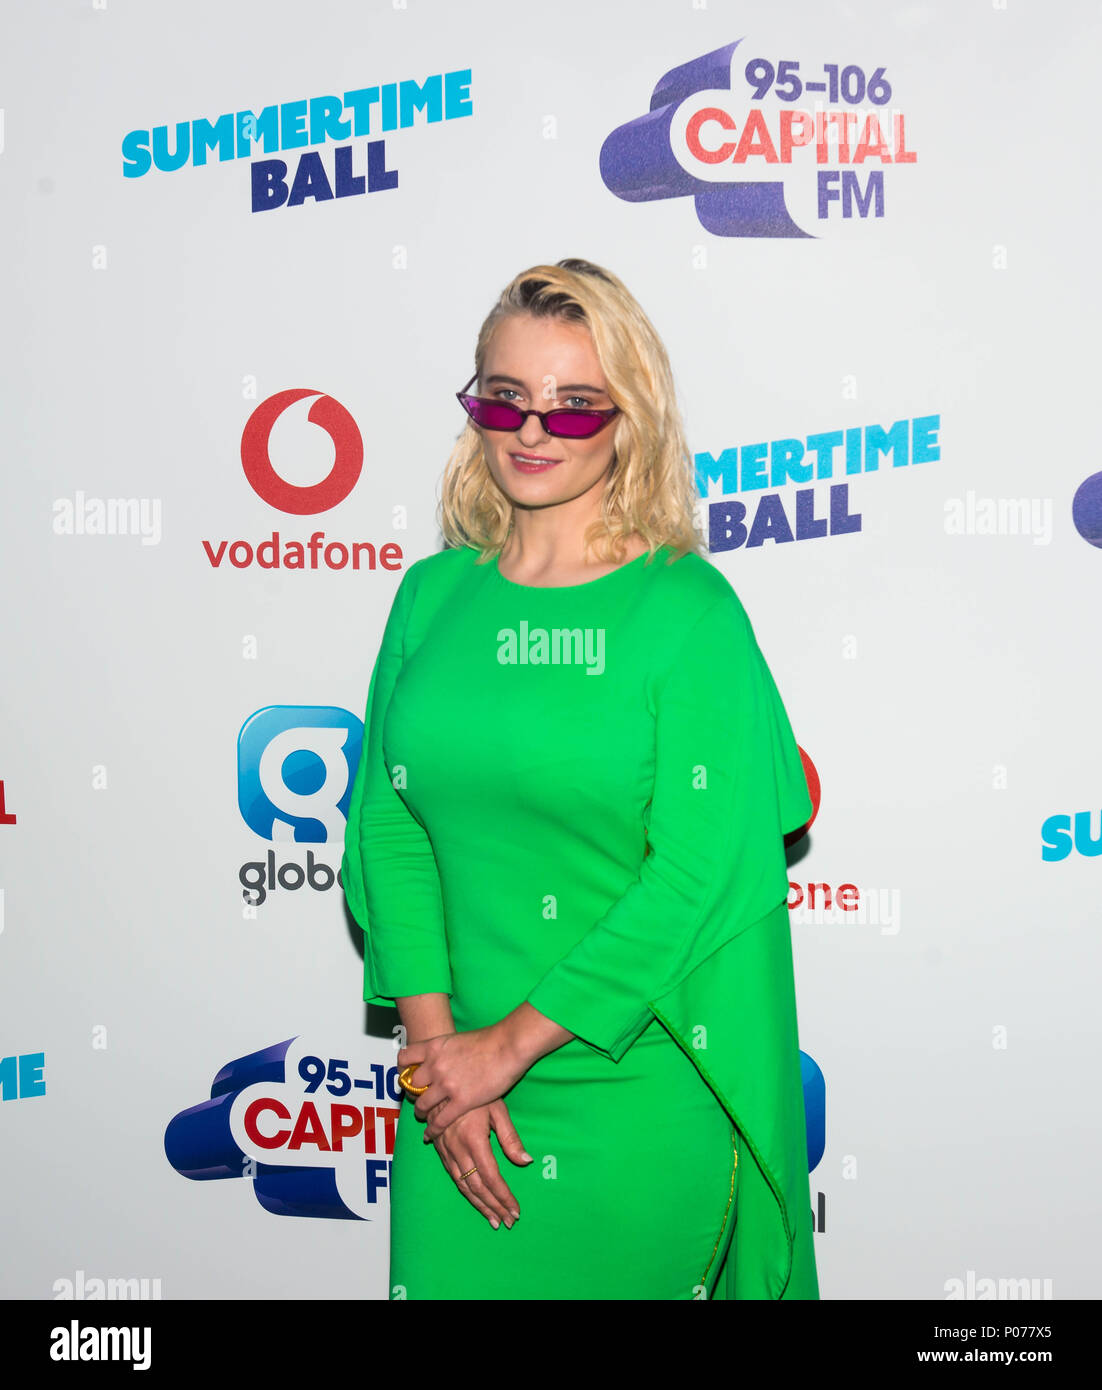 Wembley, United Kingdom. 9th June 2018. Grace Chatto of Clean Bandit at  Capital's Summertime Ball with Vodafone at London's Wembley Stadium. The  sell-out event saw performances from this summer's hottest artists Camila